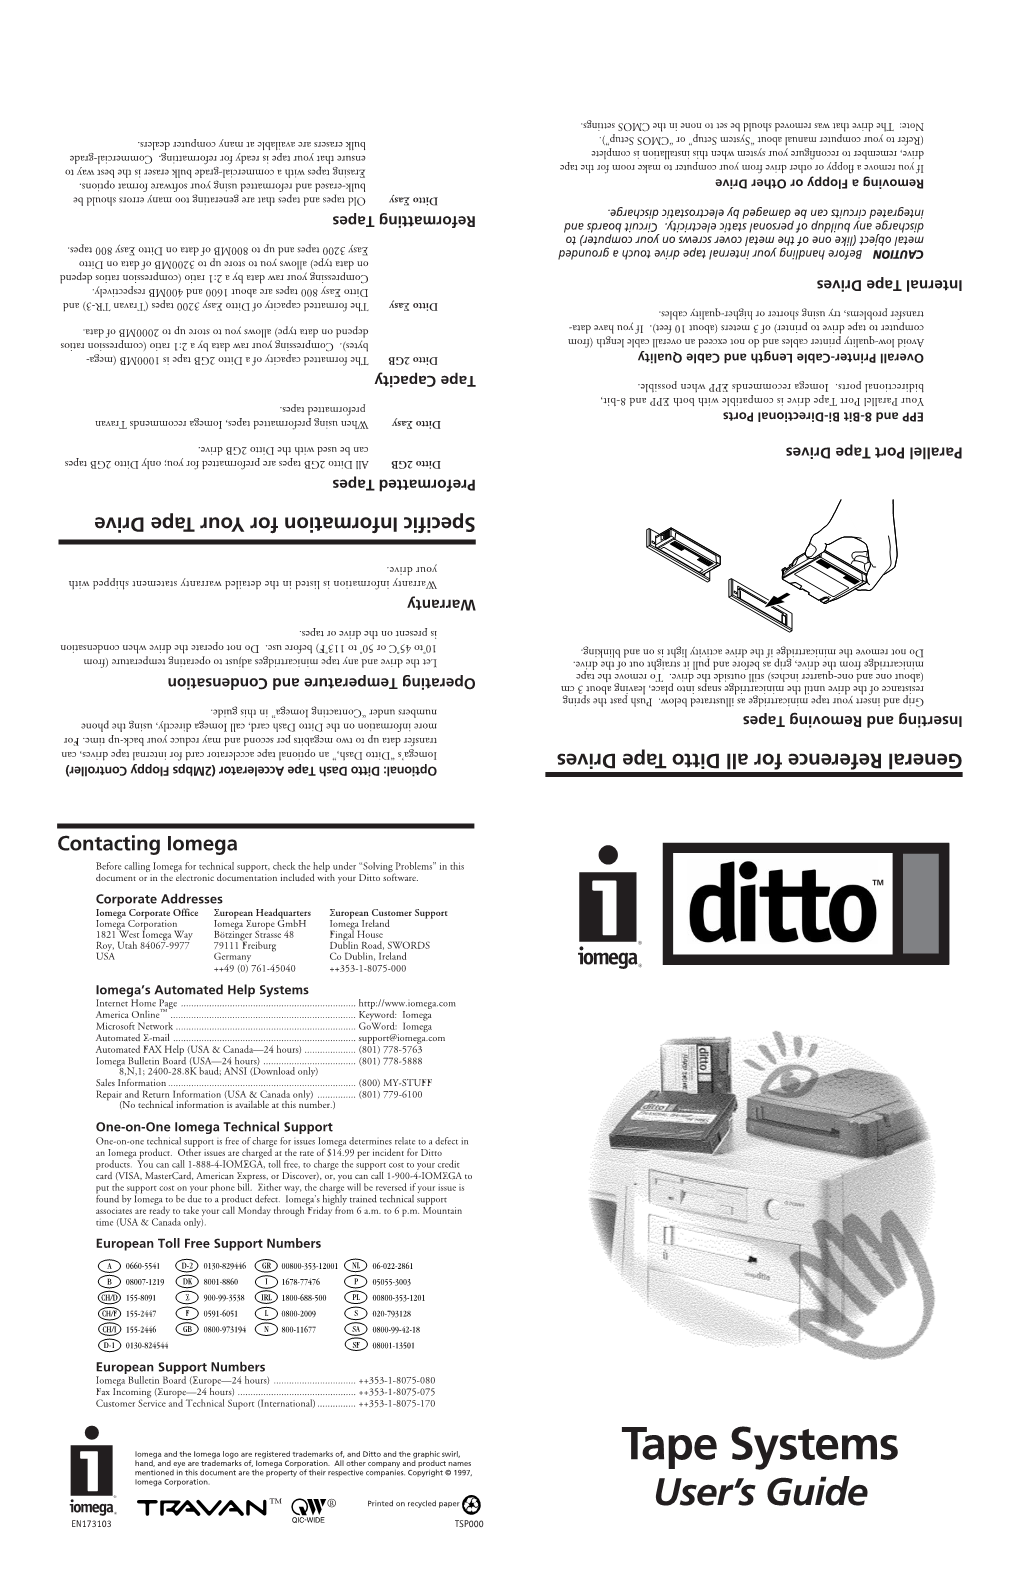 Iomega Ditto Tape Systems Users Guide